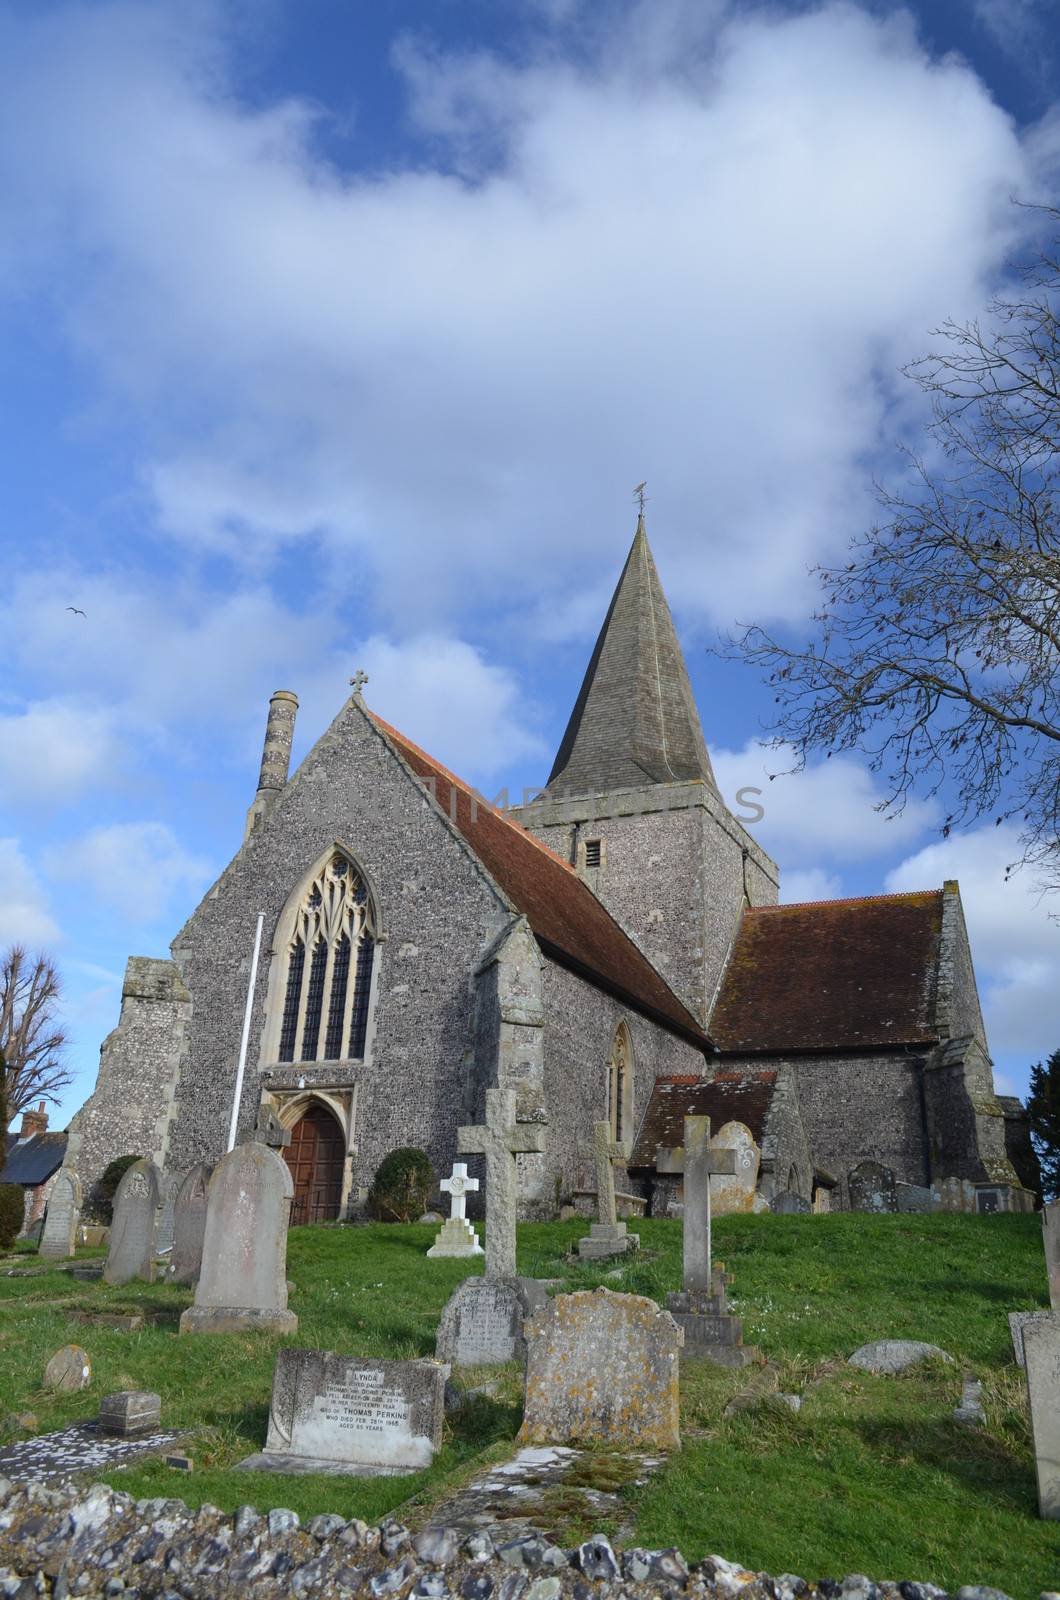 St Andrew's church at Alfriston in East Sussex.